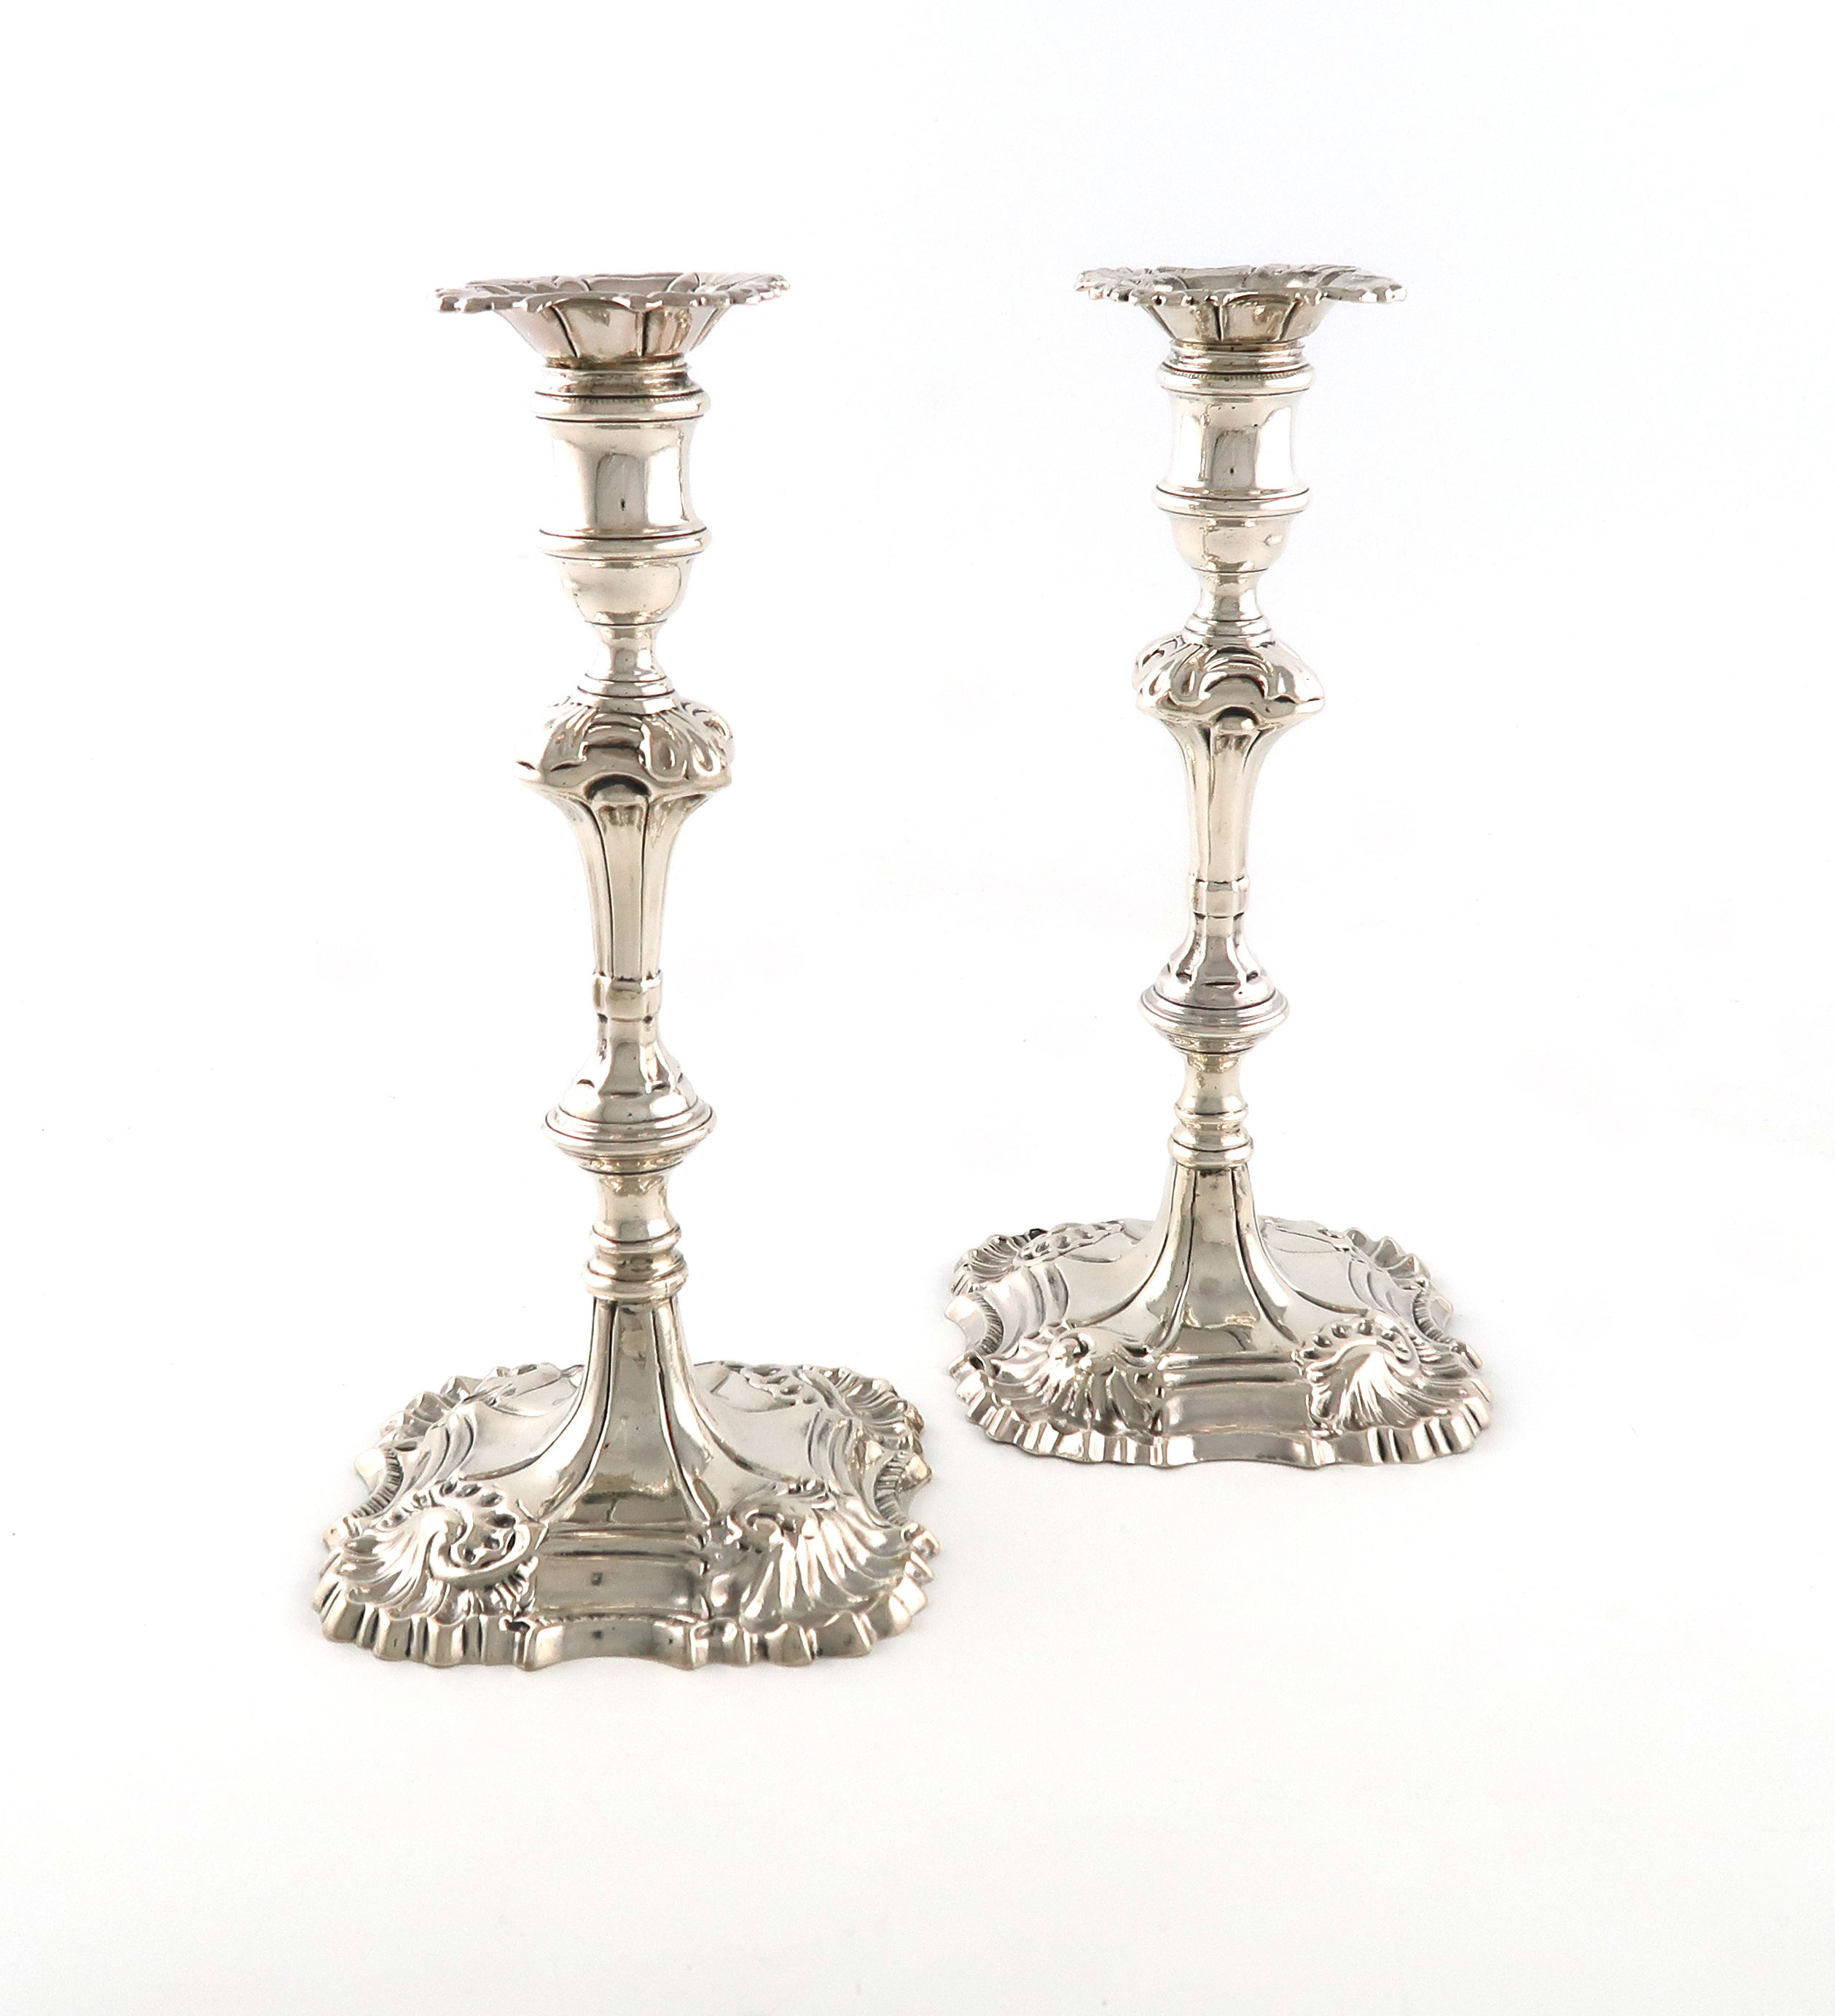 A pair of George II cast silver candlesticks, by William Cripps, London 1769, also with a French